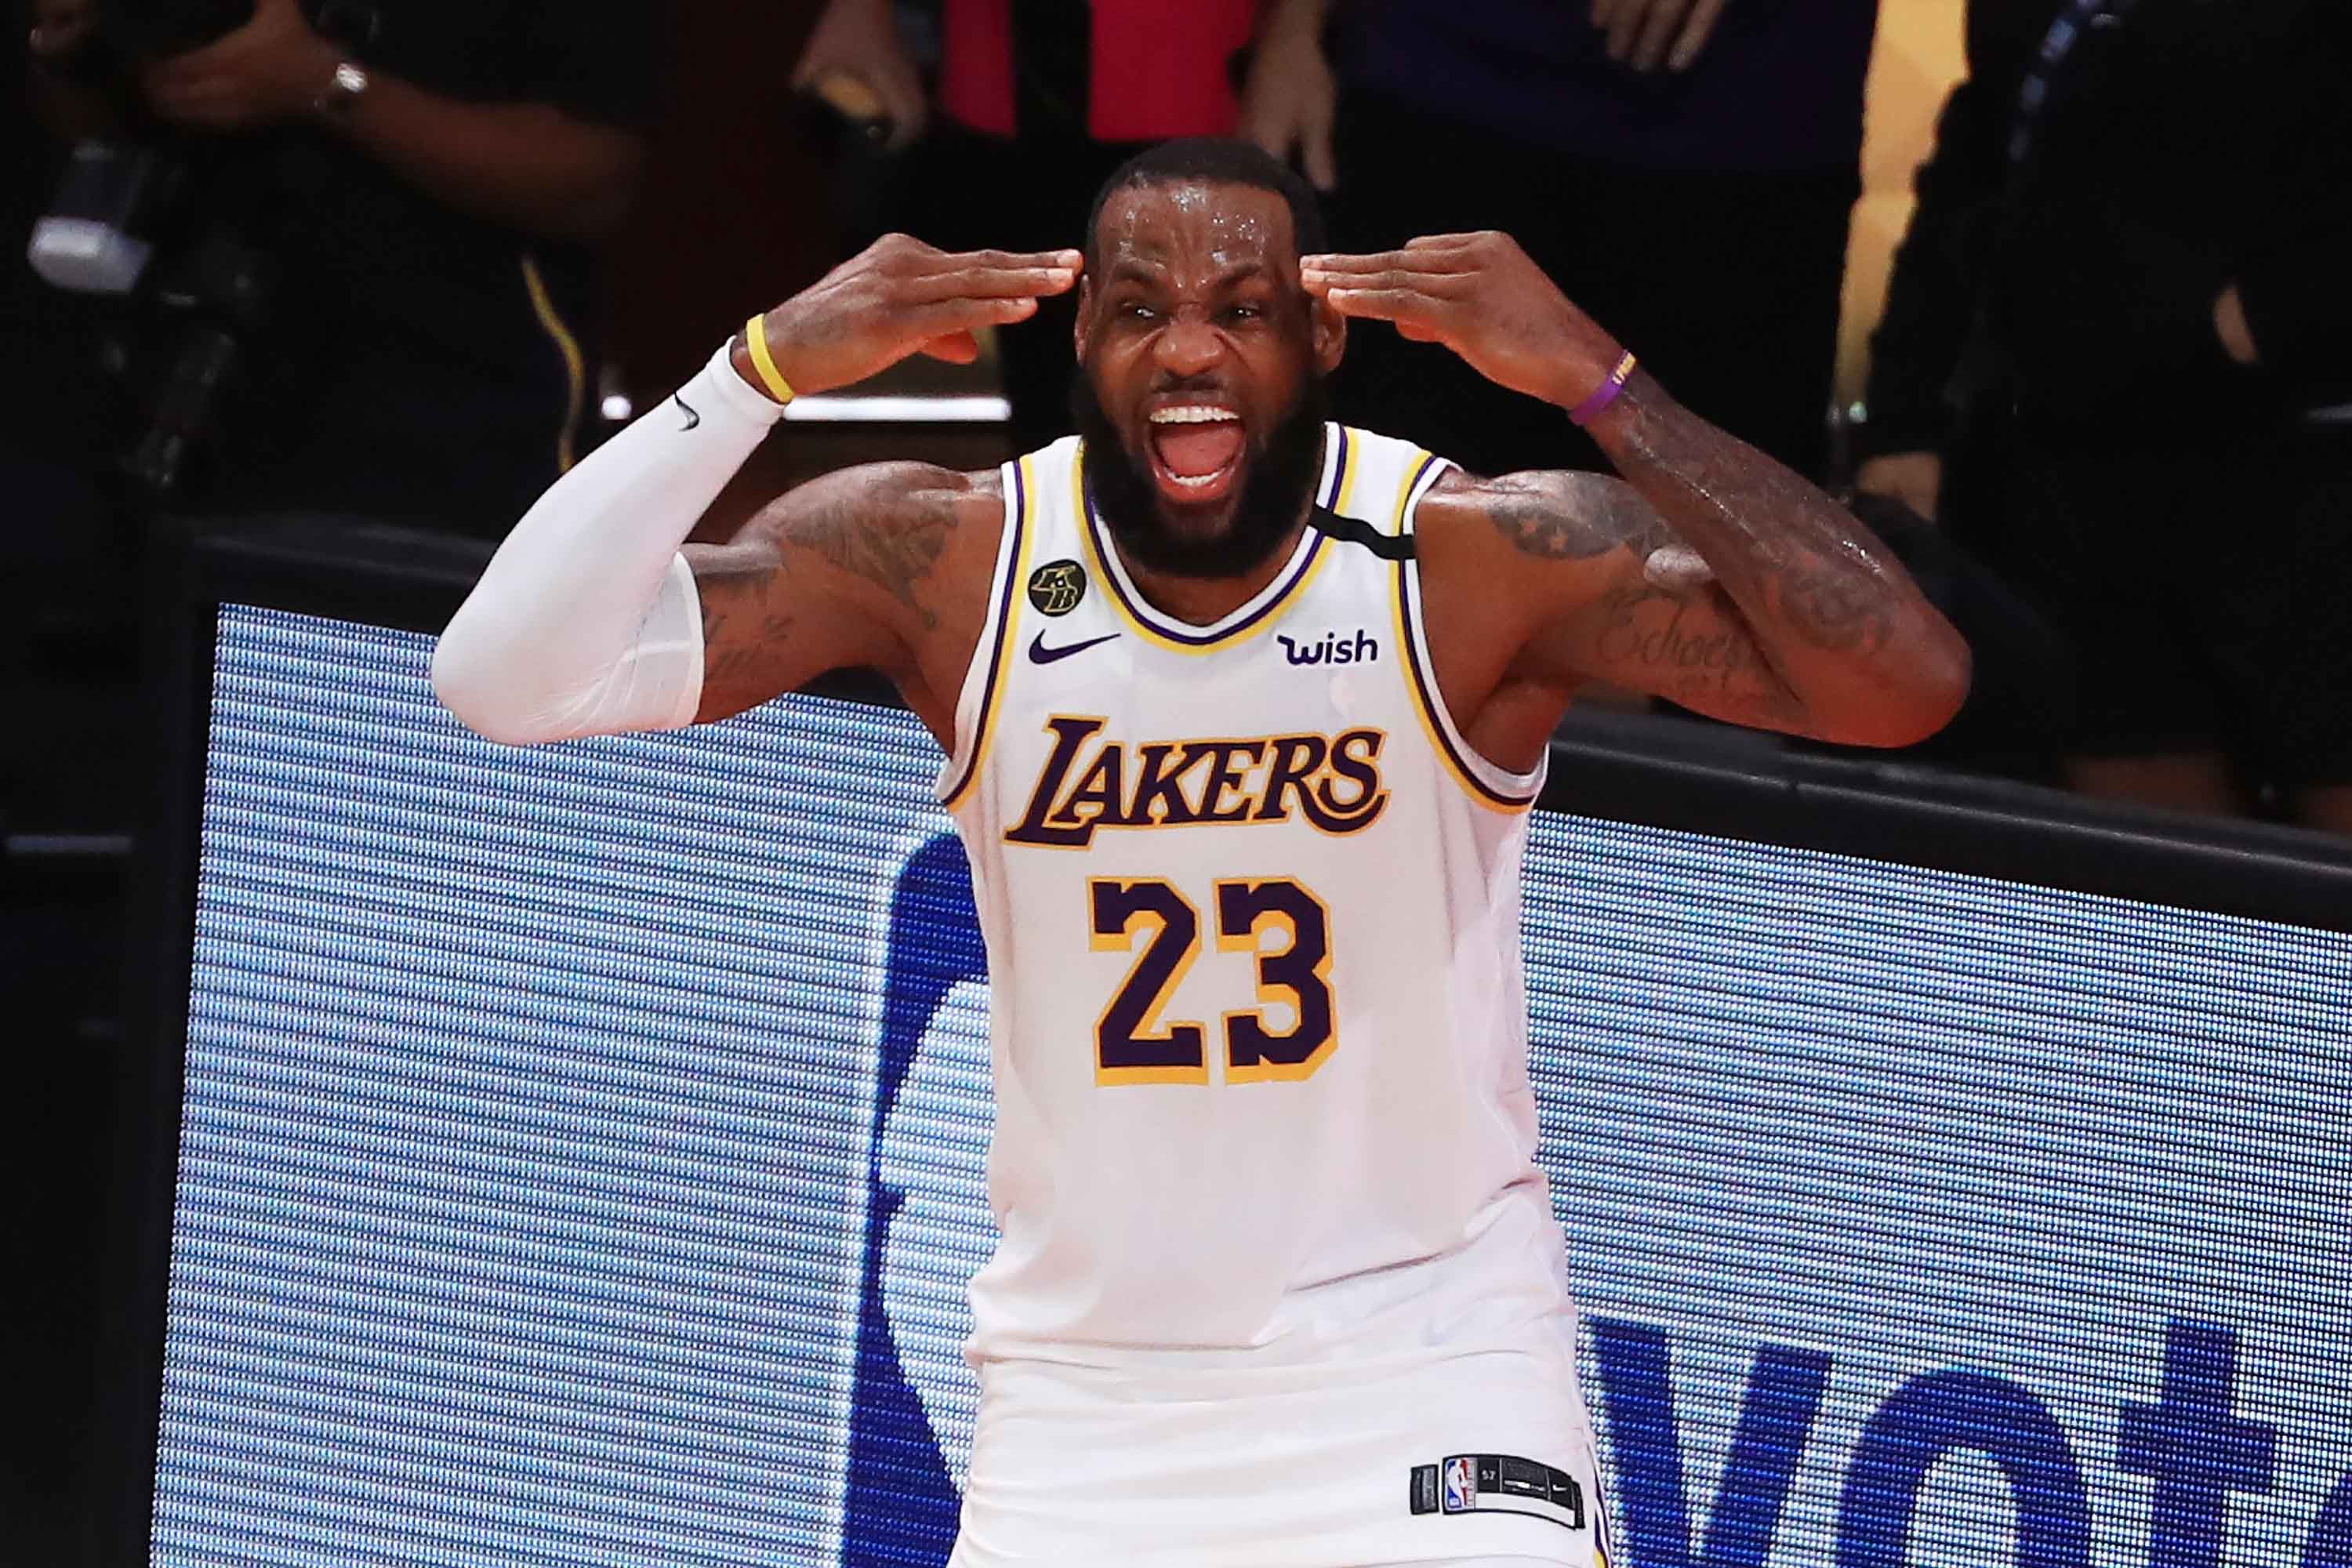 All-time Lakers Lakers History: How Will LeBron James Legacy Stack Up?